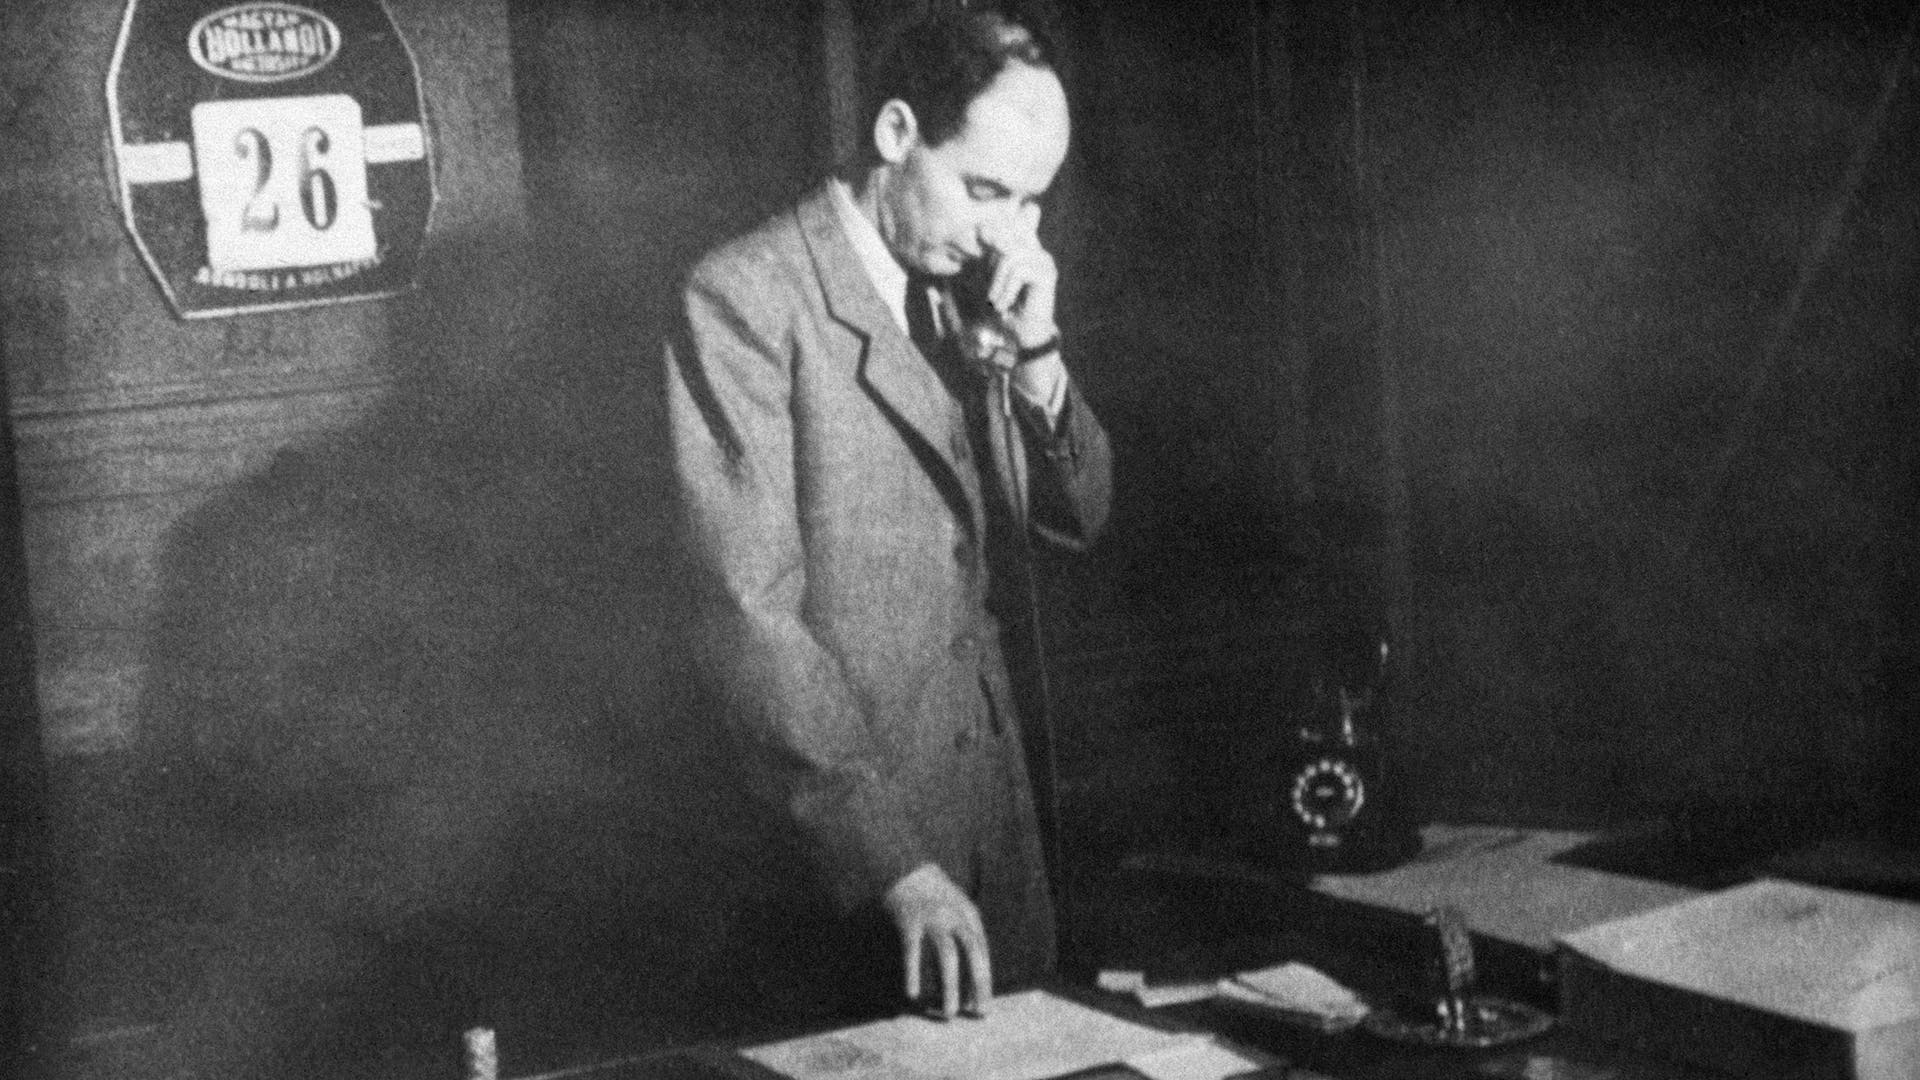 Raoul Wallenberg - Swedish architect, businessman and diplomat, who saved thousands of Jews from the Holocaust in German-occupied Hungary. Pictured: Raoul Wallenberg while serving as Sweden's special envoy in Budapest, Hungary, in 1944.